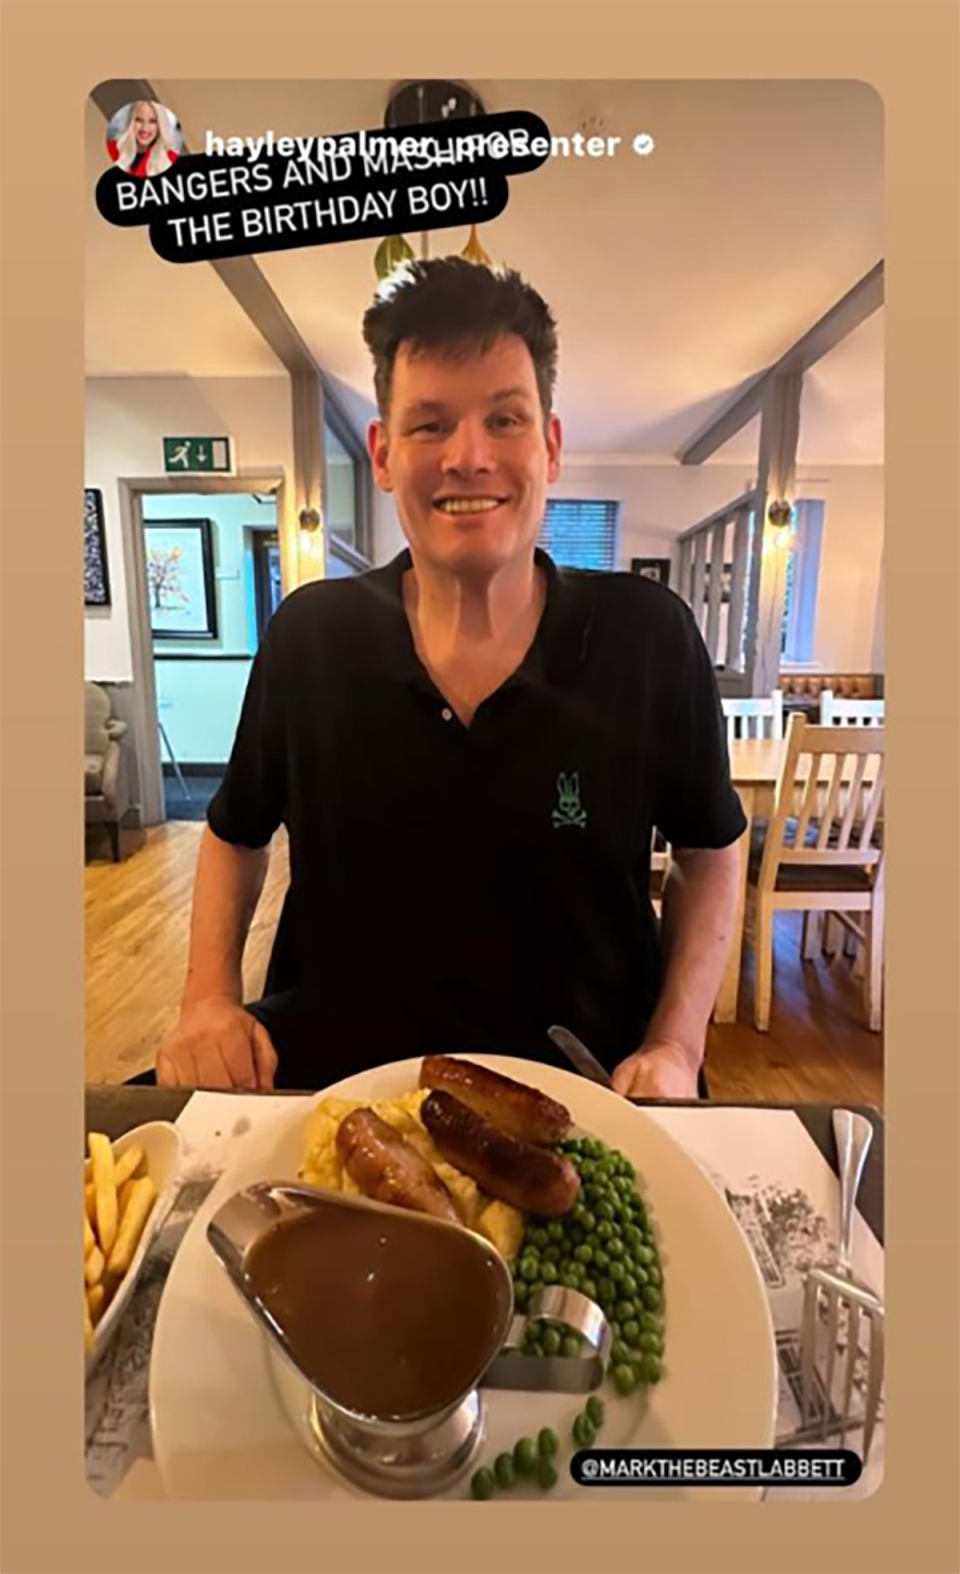 The Chase star Mark ‘The Beast’ Labbett eating bangers and mash.